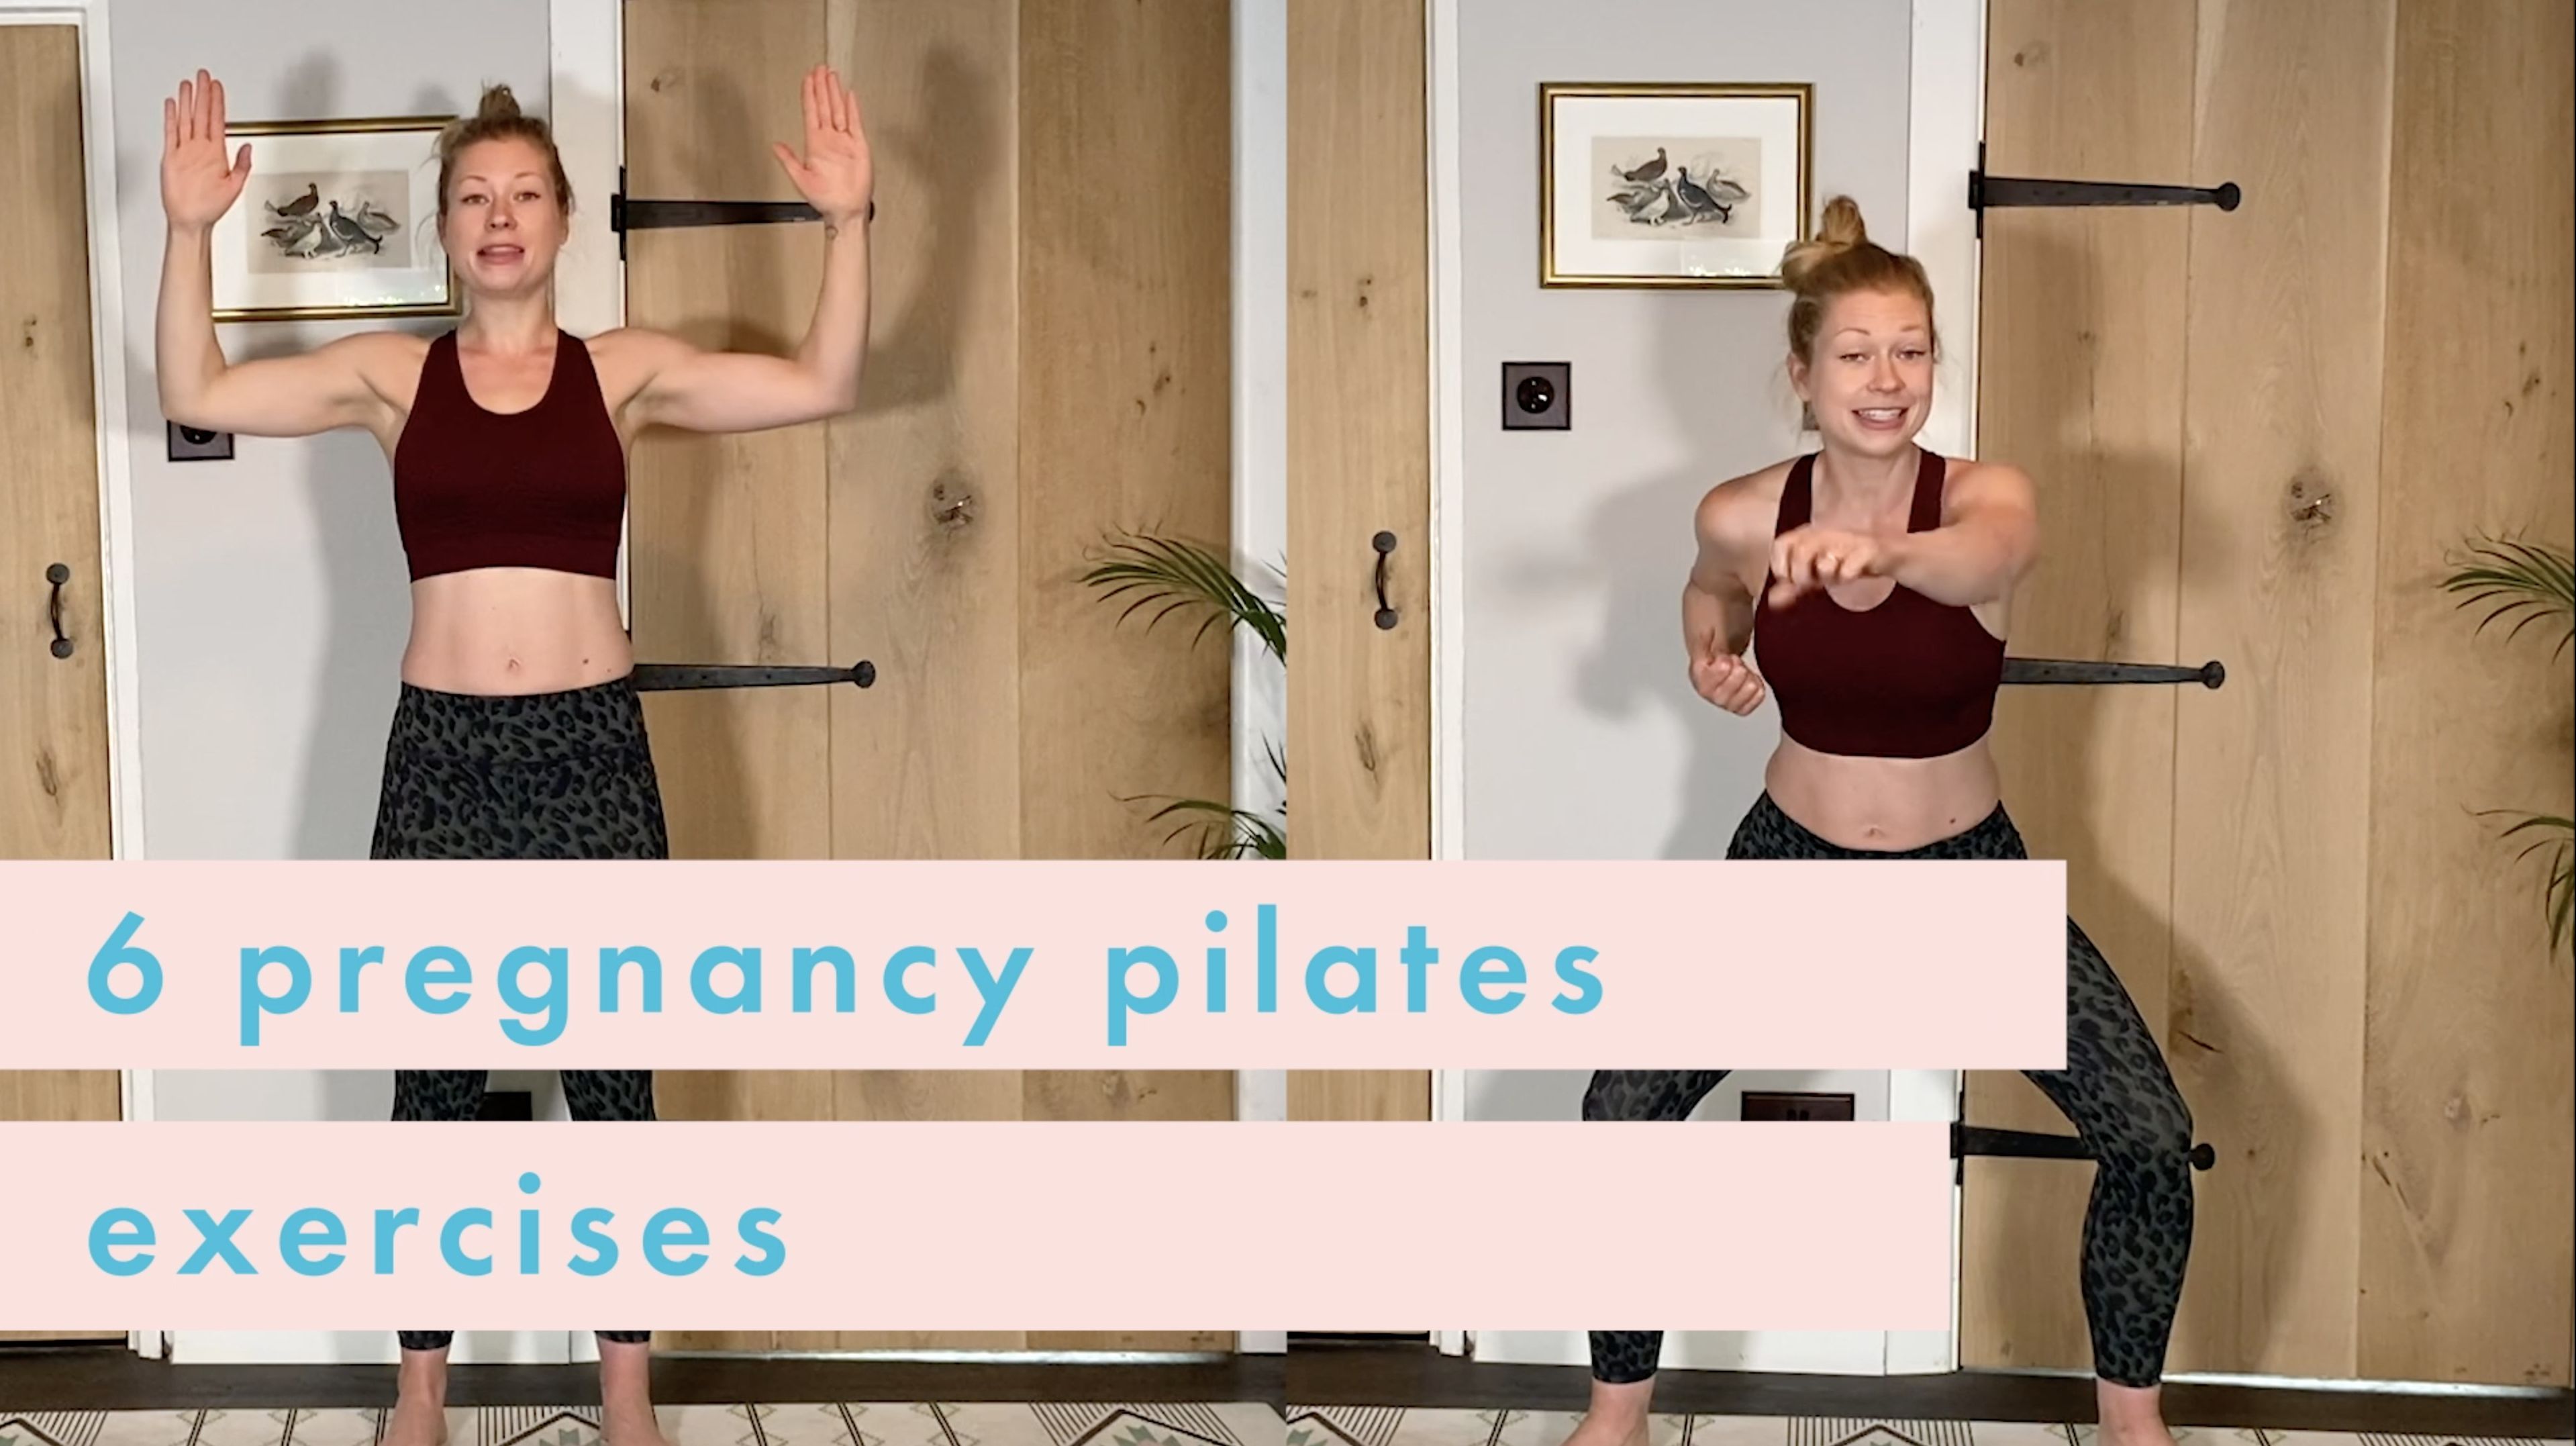 I did Pilates every day for 2 weeks, here's what happened